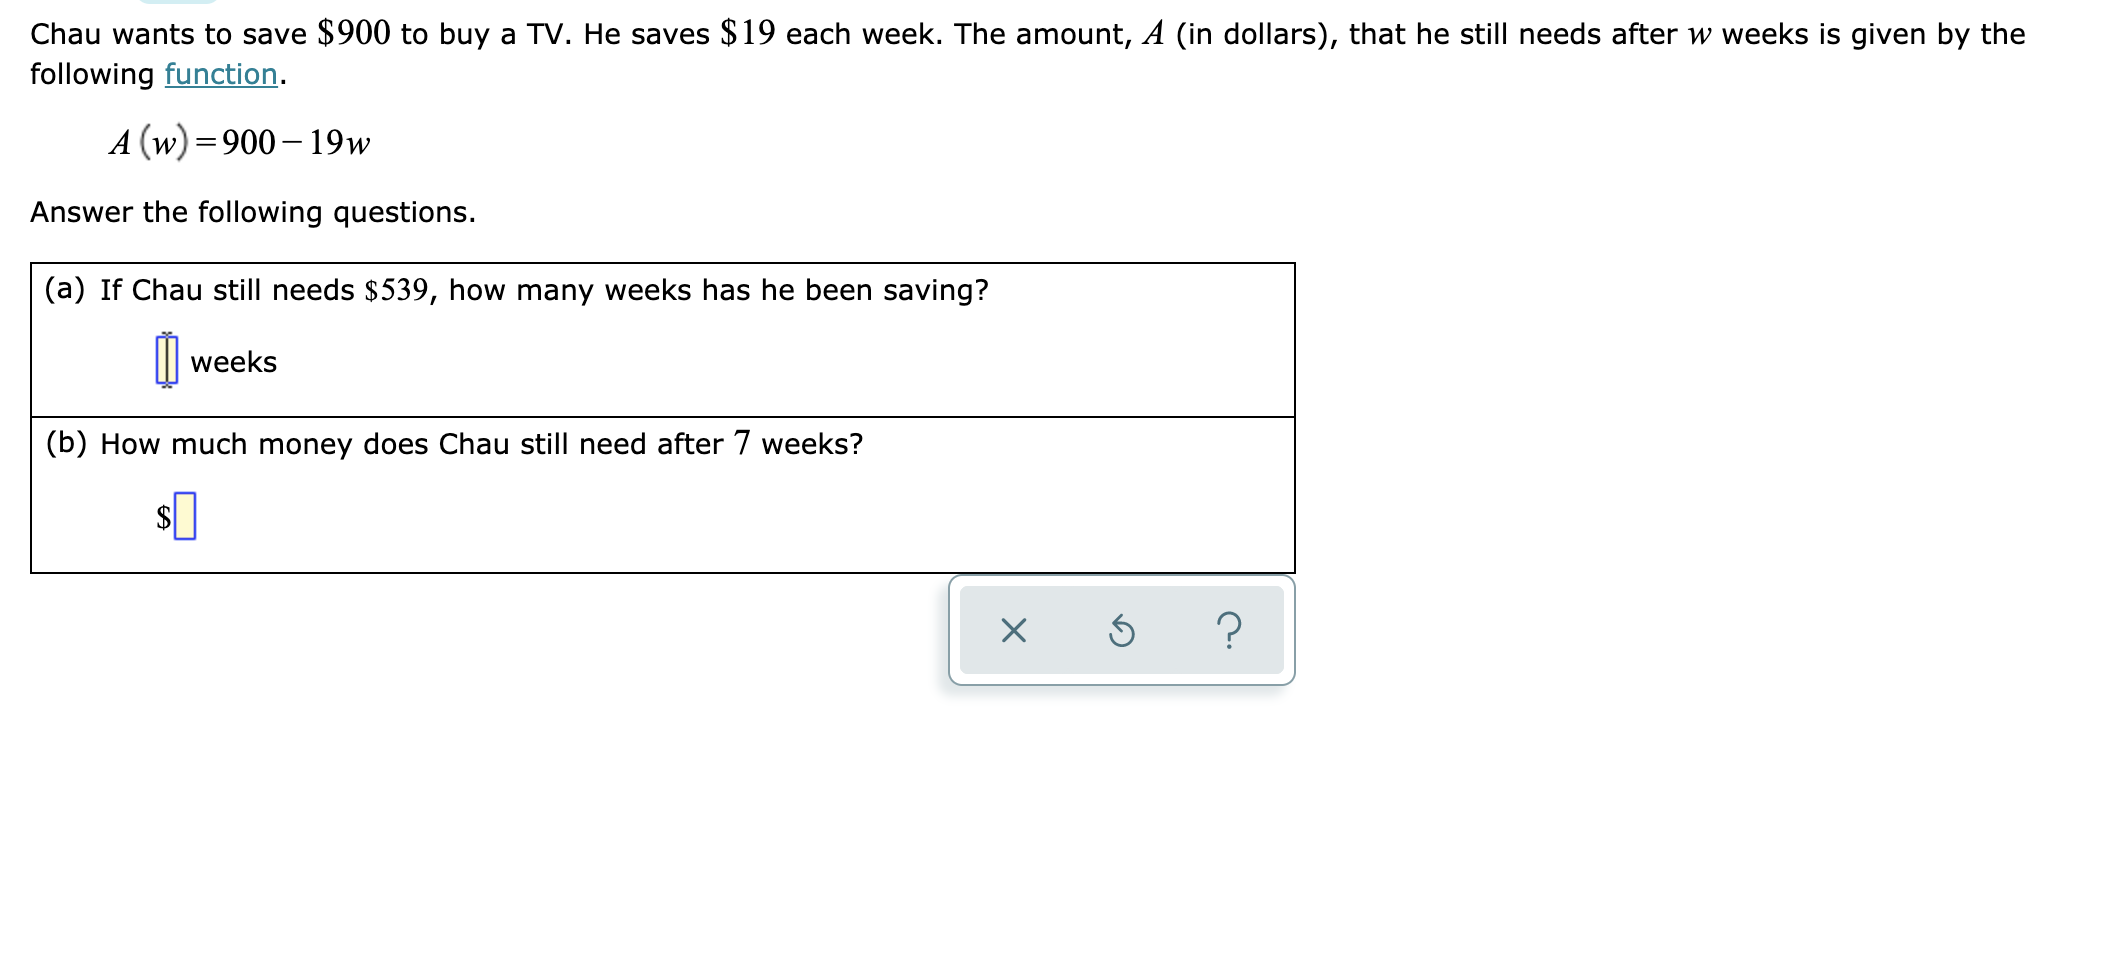 Chau wants to save $900 to buy a TV. He saves $19 each week. The amount, A (in dollars), that he still needs after w weeks is given by the
following function
A (w)900 19w
Answer the following questions.
(a) If Chau still needs $539, how many weeks has he been saving?
weeks
(b) How much money does Chau still need after 7 weeks?
